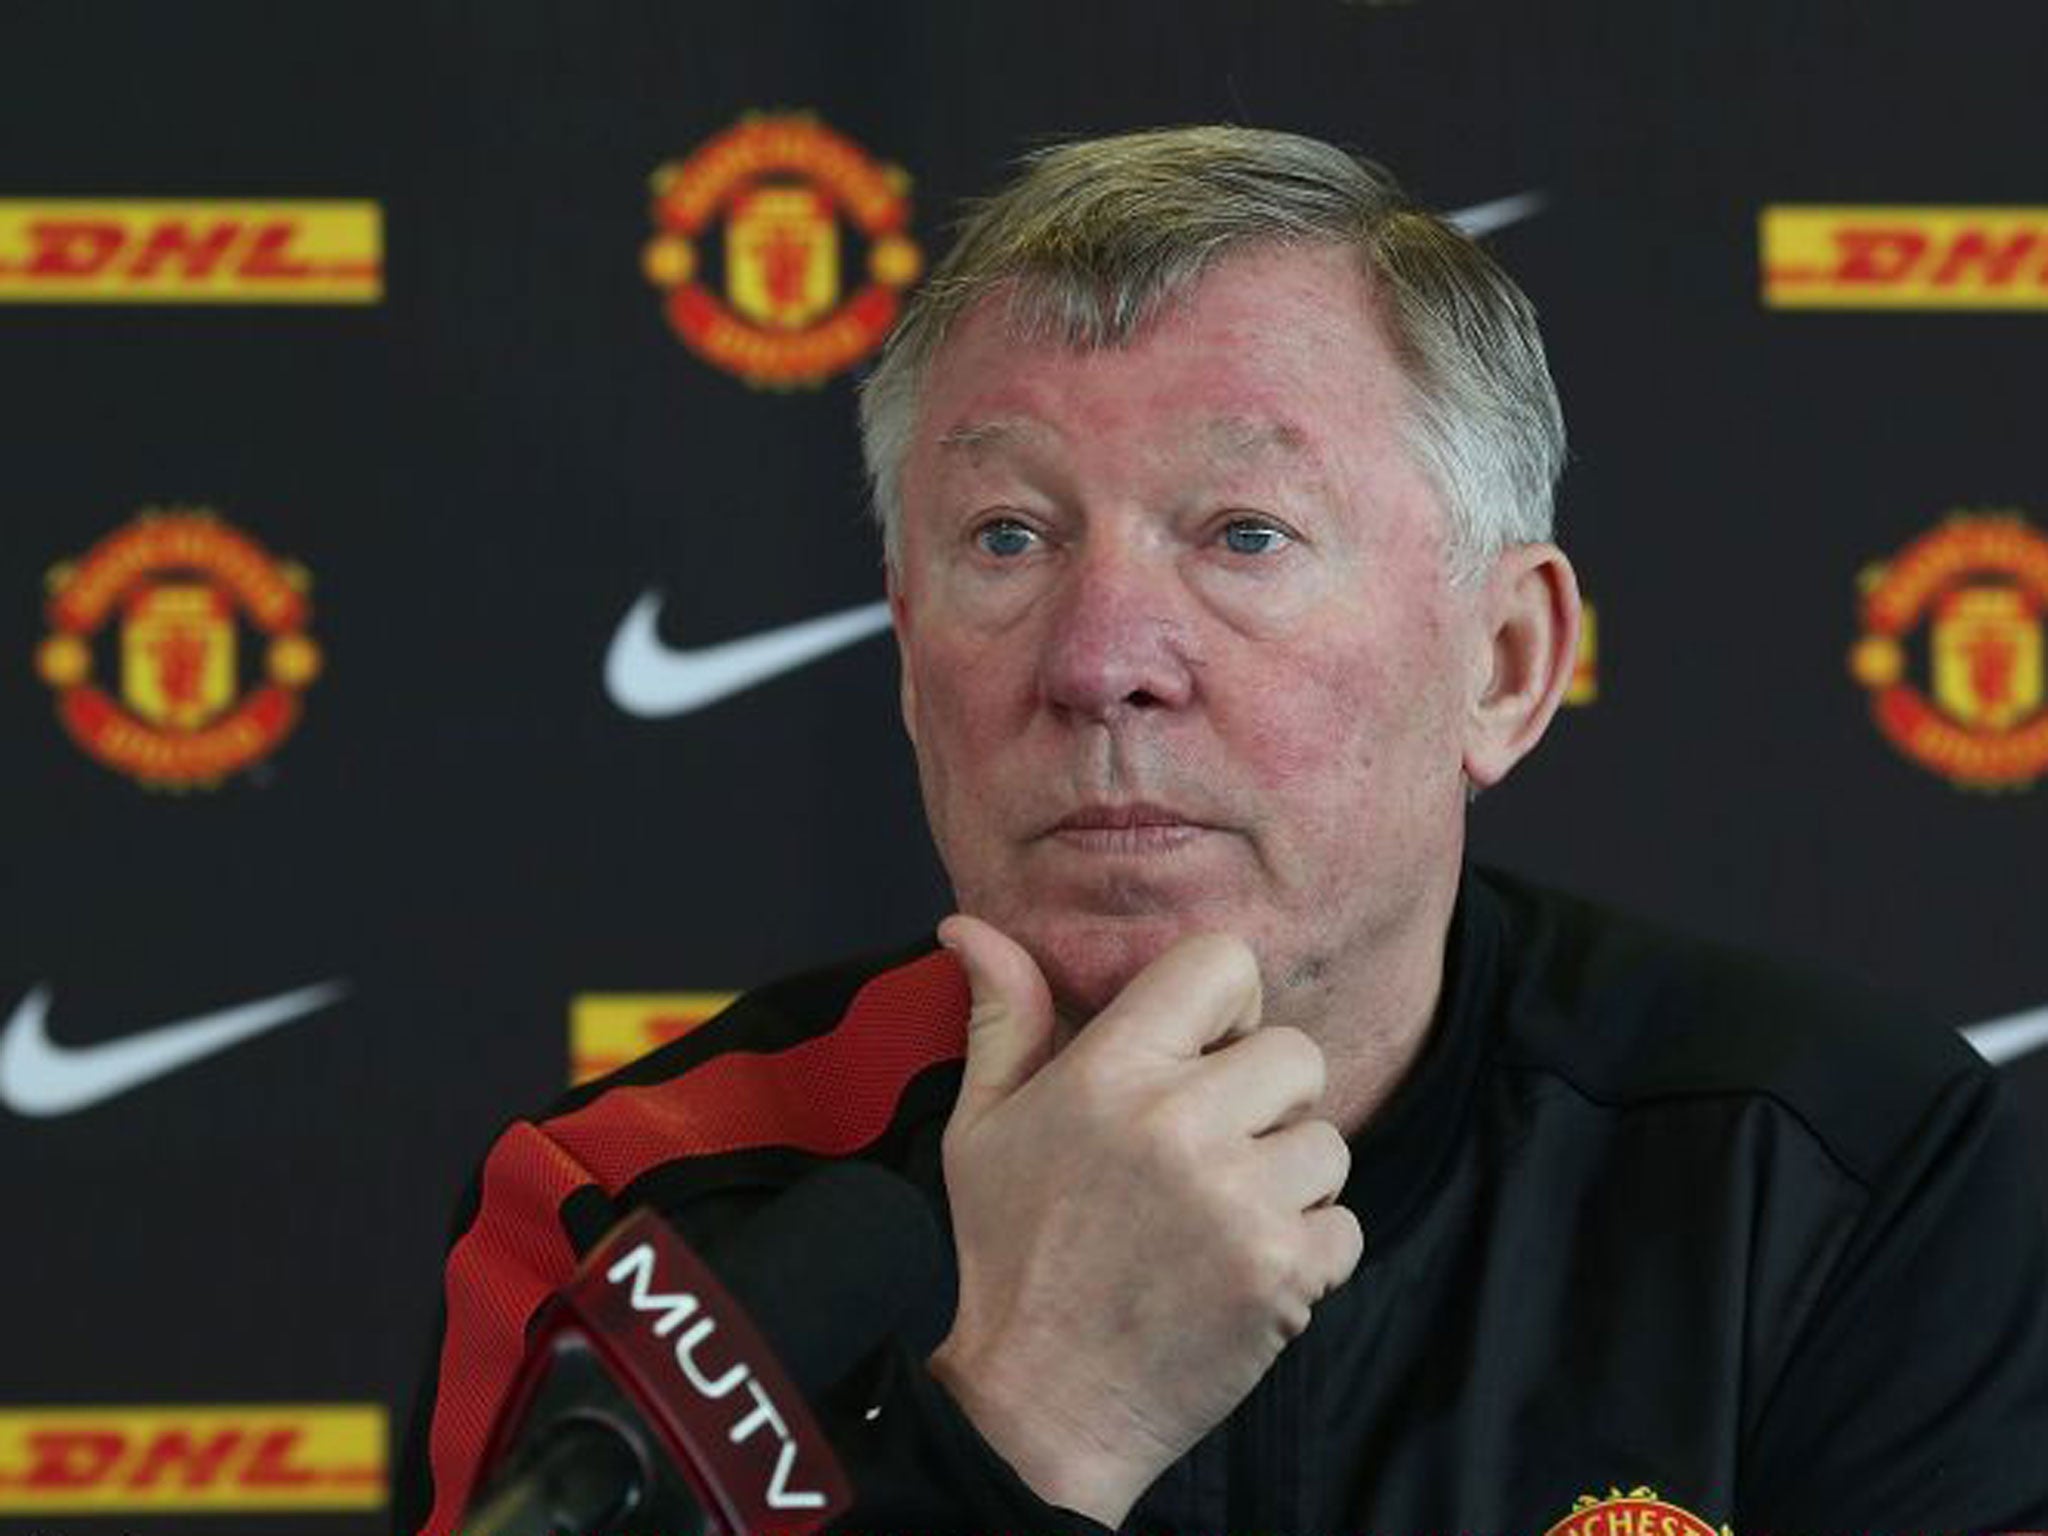 ‘We’d like to see agents go away,’ says Sir Alex Ferguson